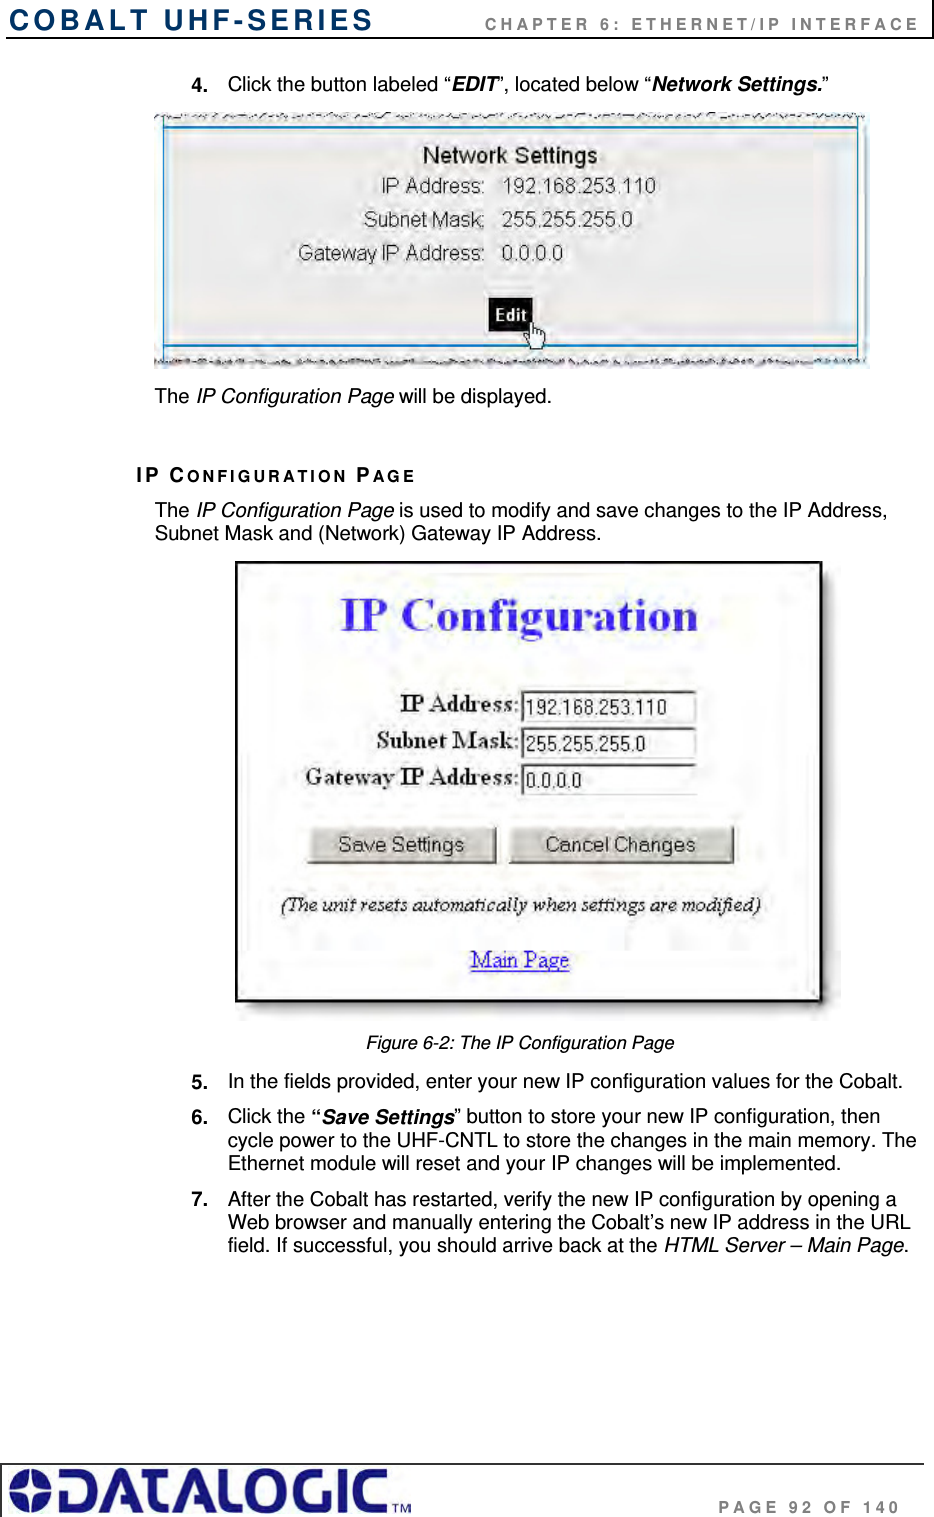 COBALT UHF-SERIES    CHAPTER 6: ETHERNET/IP INTERFACE                                     PAGE 92 OF 140 4.  Click the button labeled “EDIT”, located below “Network Settings.”   The IP Configuration Page will be displayed.  IP CONFIGURATION PAGE The IP Configuration Page is used to modify and save changes to the IP Address, Subnet Mask and (Network) Gateway IP Address.   Figure 6-2: The IP Configuration Page 5.  In the fields provided, enter your new IP configuration values for the Cobalt. 6.  Click the “Save Settings” button to store your new IP configuration, then cycle power to the UHF-CNTL to store the changes in the main memory. The Ethernet module will reset and your IP changes will be implemented.  7.  After the Cobalt has restarted, verify the new IP configuration by opening a Web browser and manually entering the Cobalt’s new IP address in the URL field. If successful, you should arrive back at the HTML Server – Main Page.    